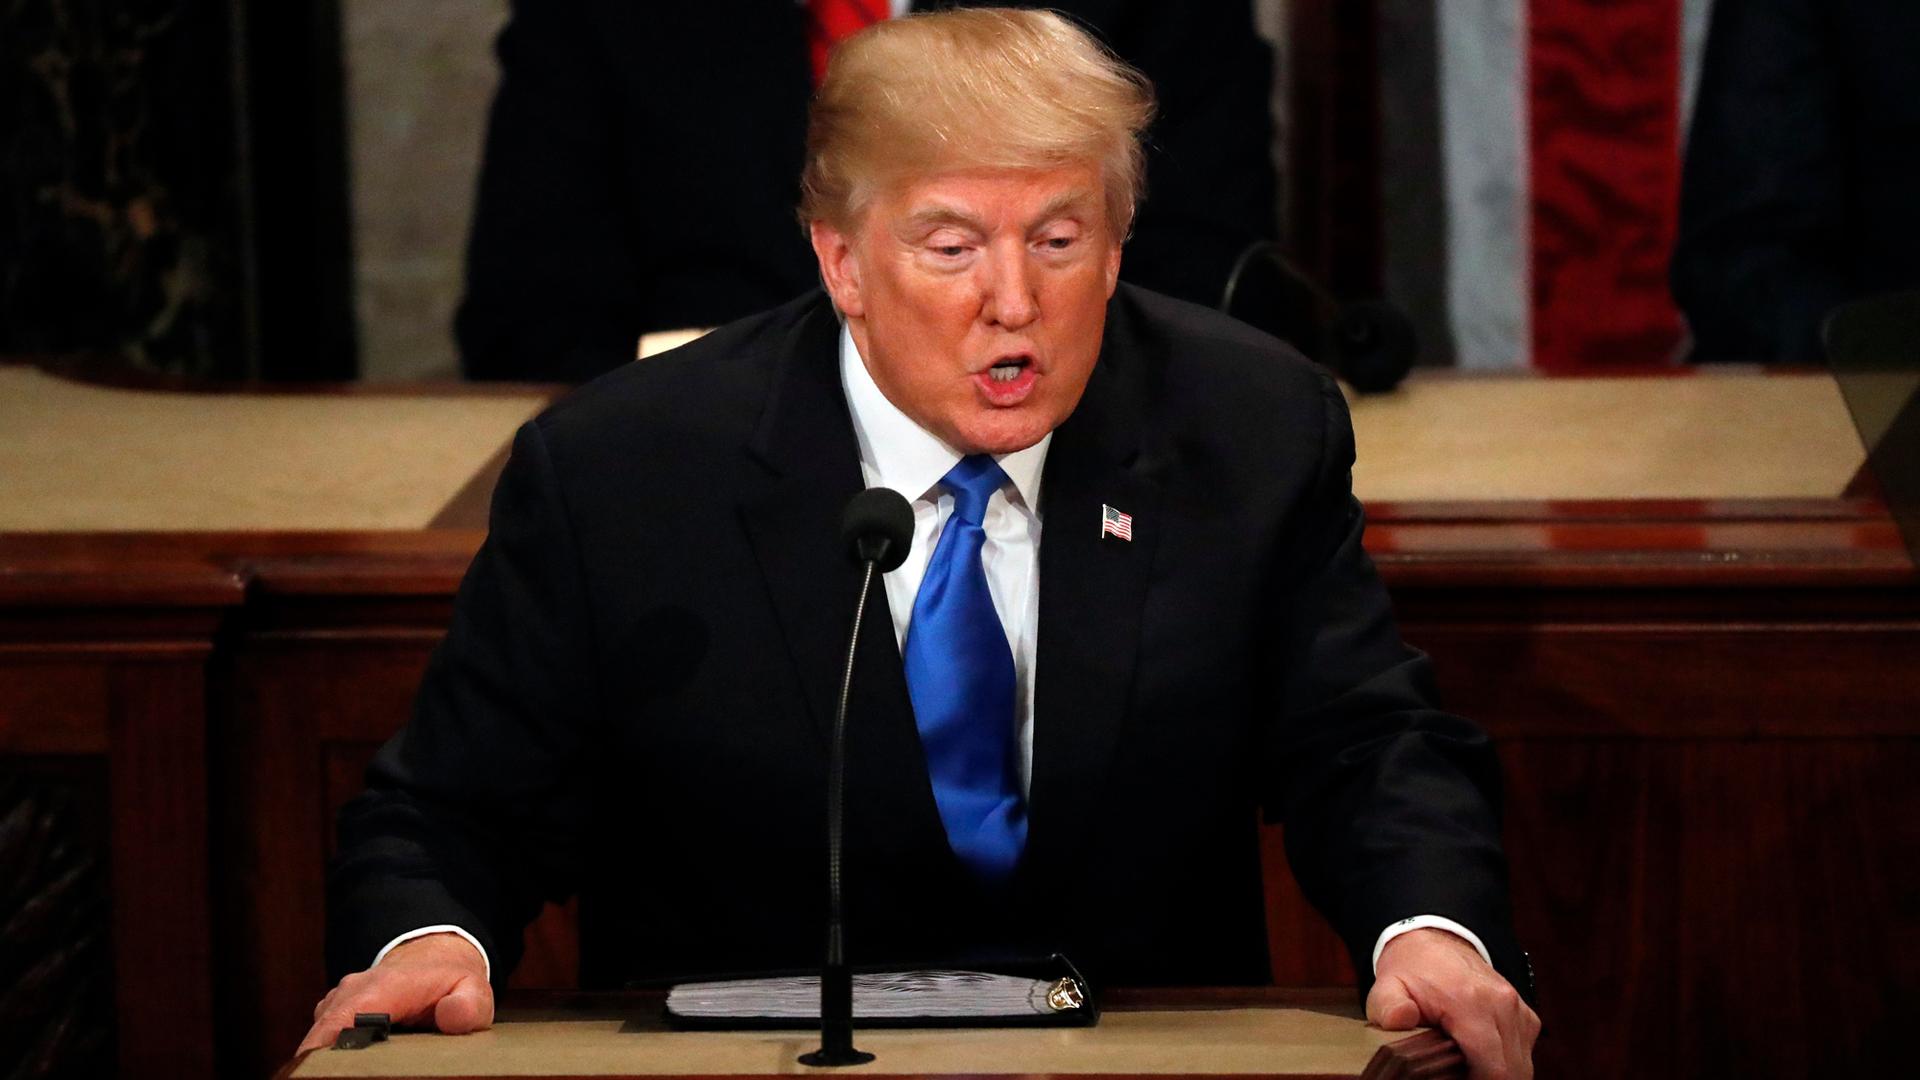 President Donald Trump delivers his State of the Union address to a joint session of the US Congress, Jan. 30, 2018.